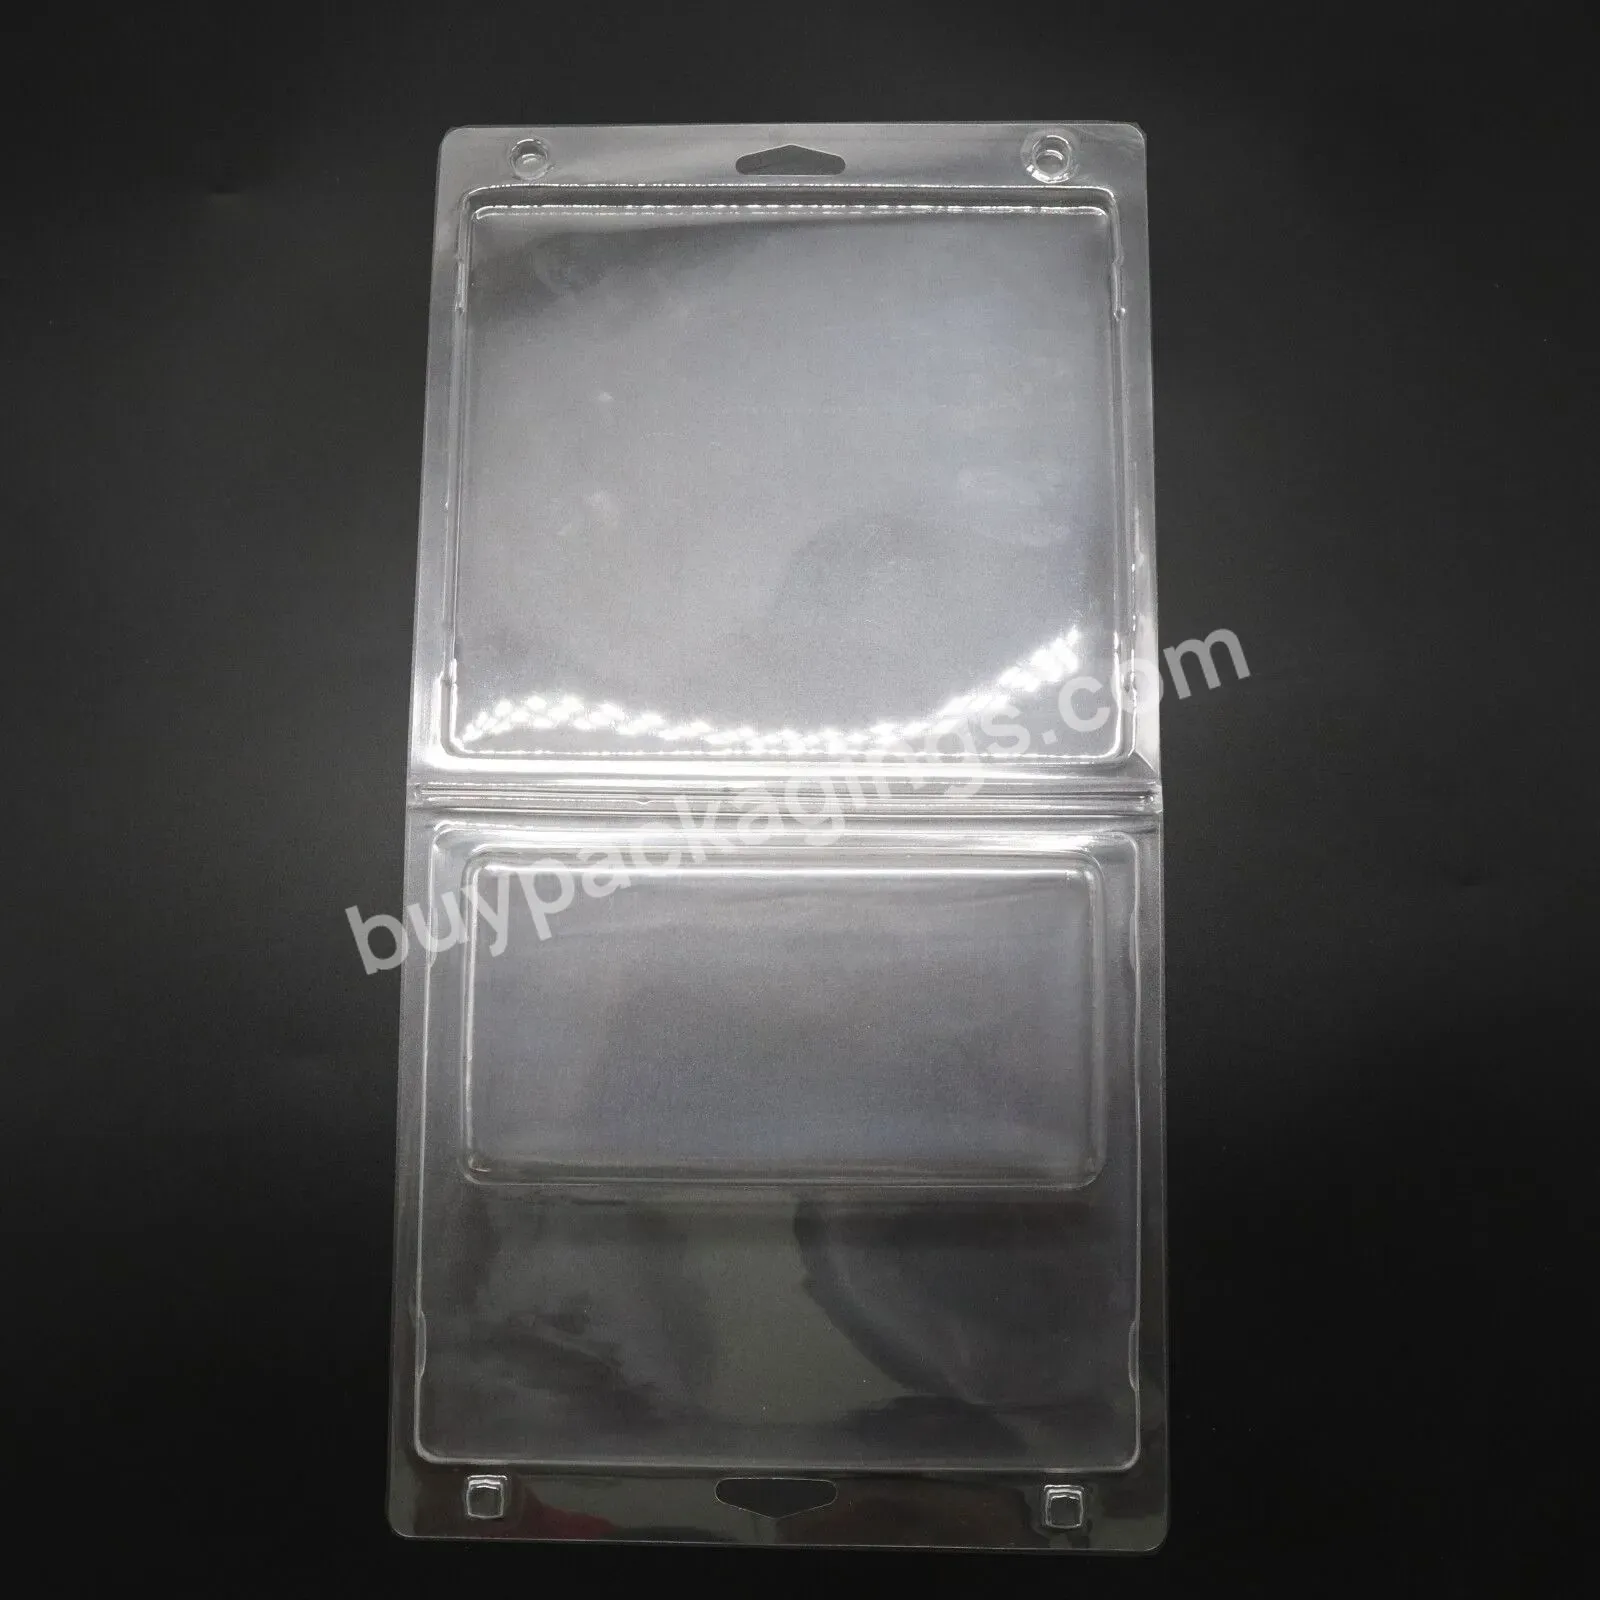 Pvc Blister Sealing Small Packaging Cartridge Plastic Design Stock Clear Clamshell Disposable Box Containers - Buy Plastic Stock Clear Clamshell Box,Pvc Clamshell Disposable Box Packaging,Clear Clamshell Containers.